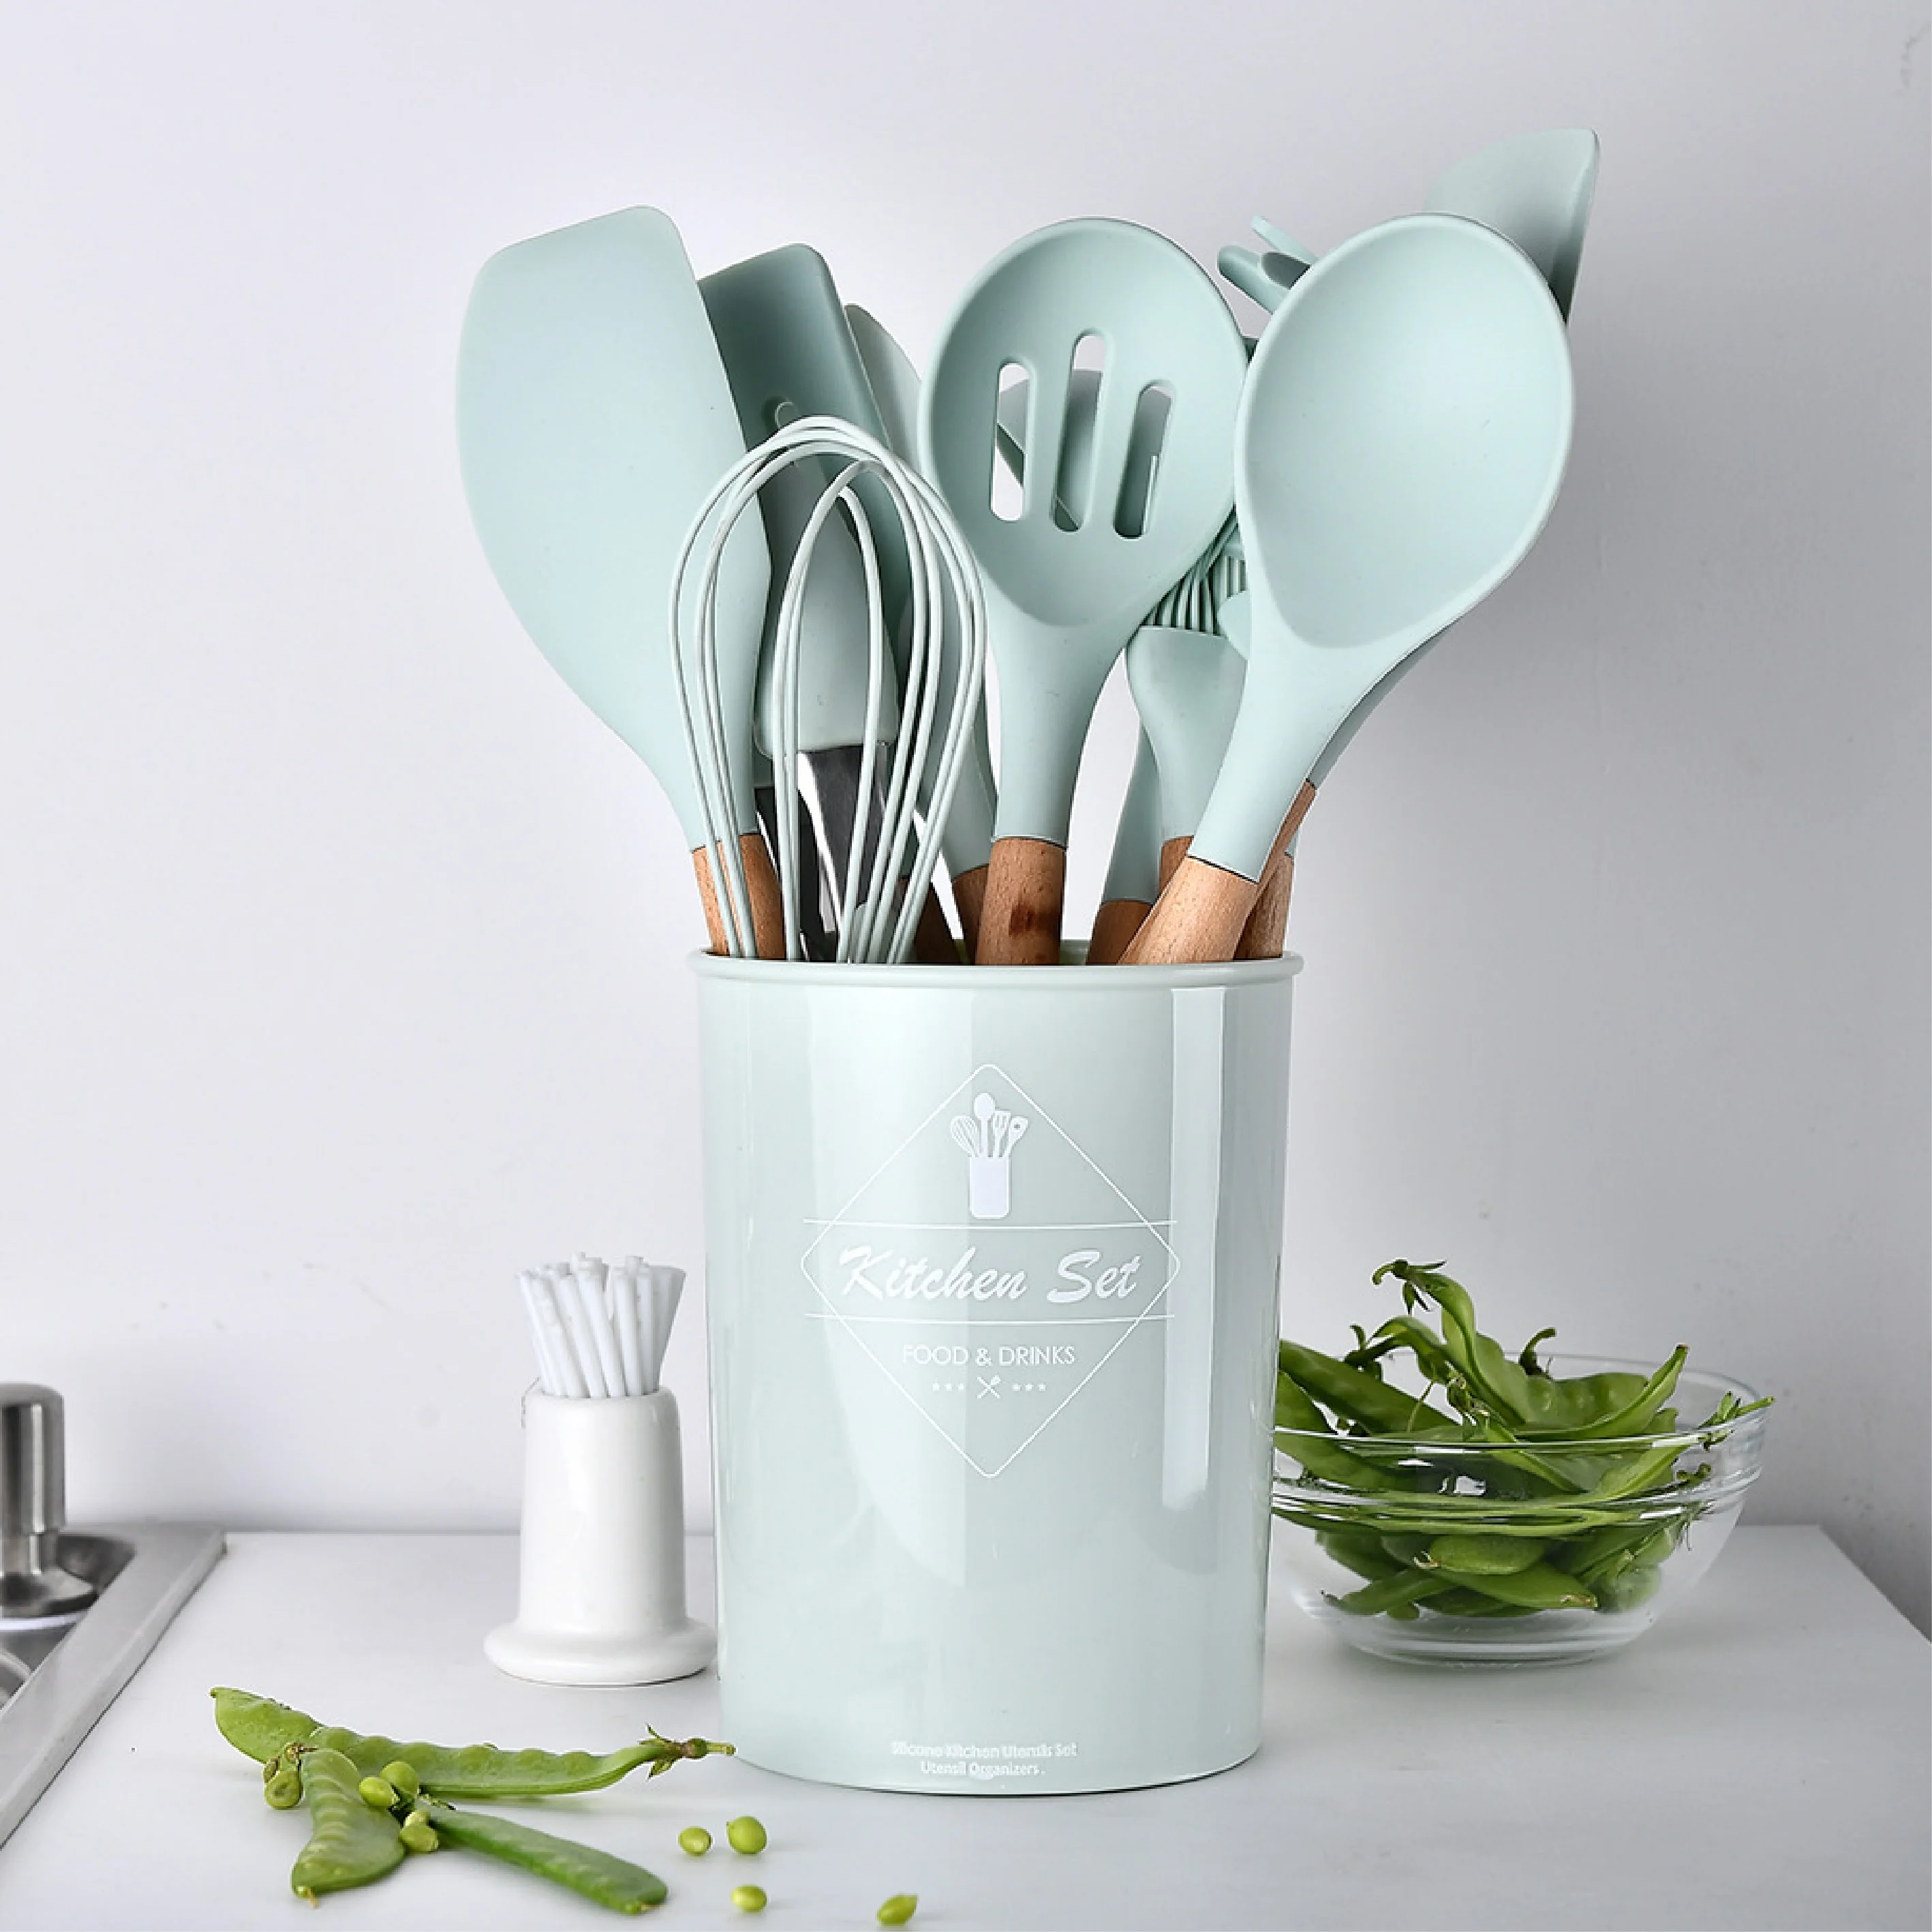 

Green Kitchenware tool Silicone cooking Kitchen Utensil Set With Wooden Handle holder Accessories Spatula Turner Ladle cookware, Customized